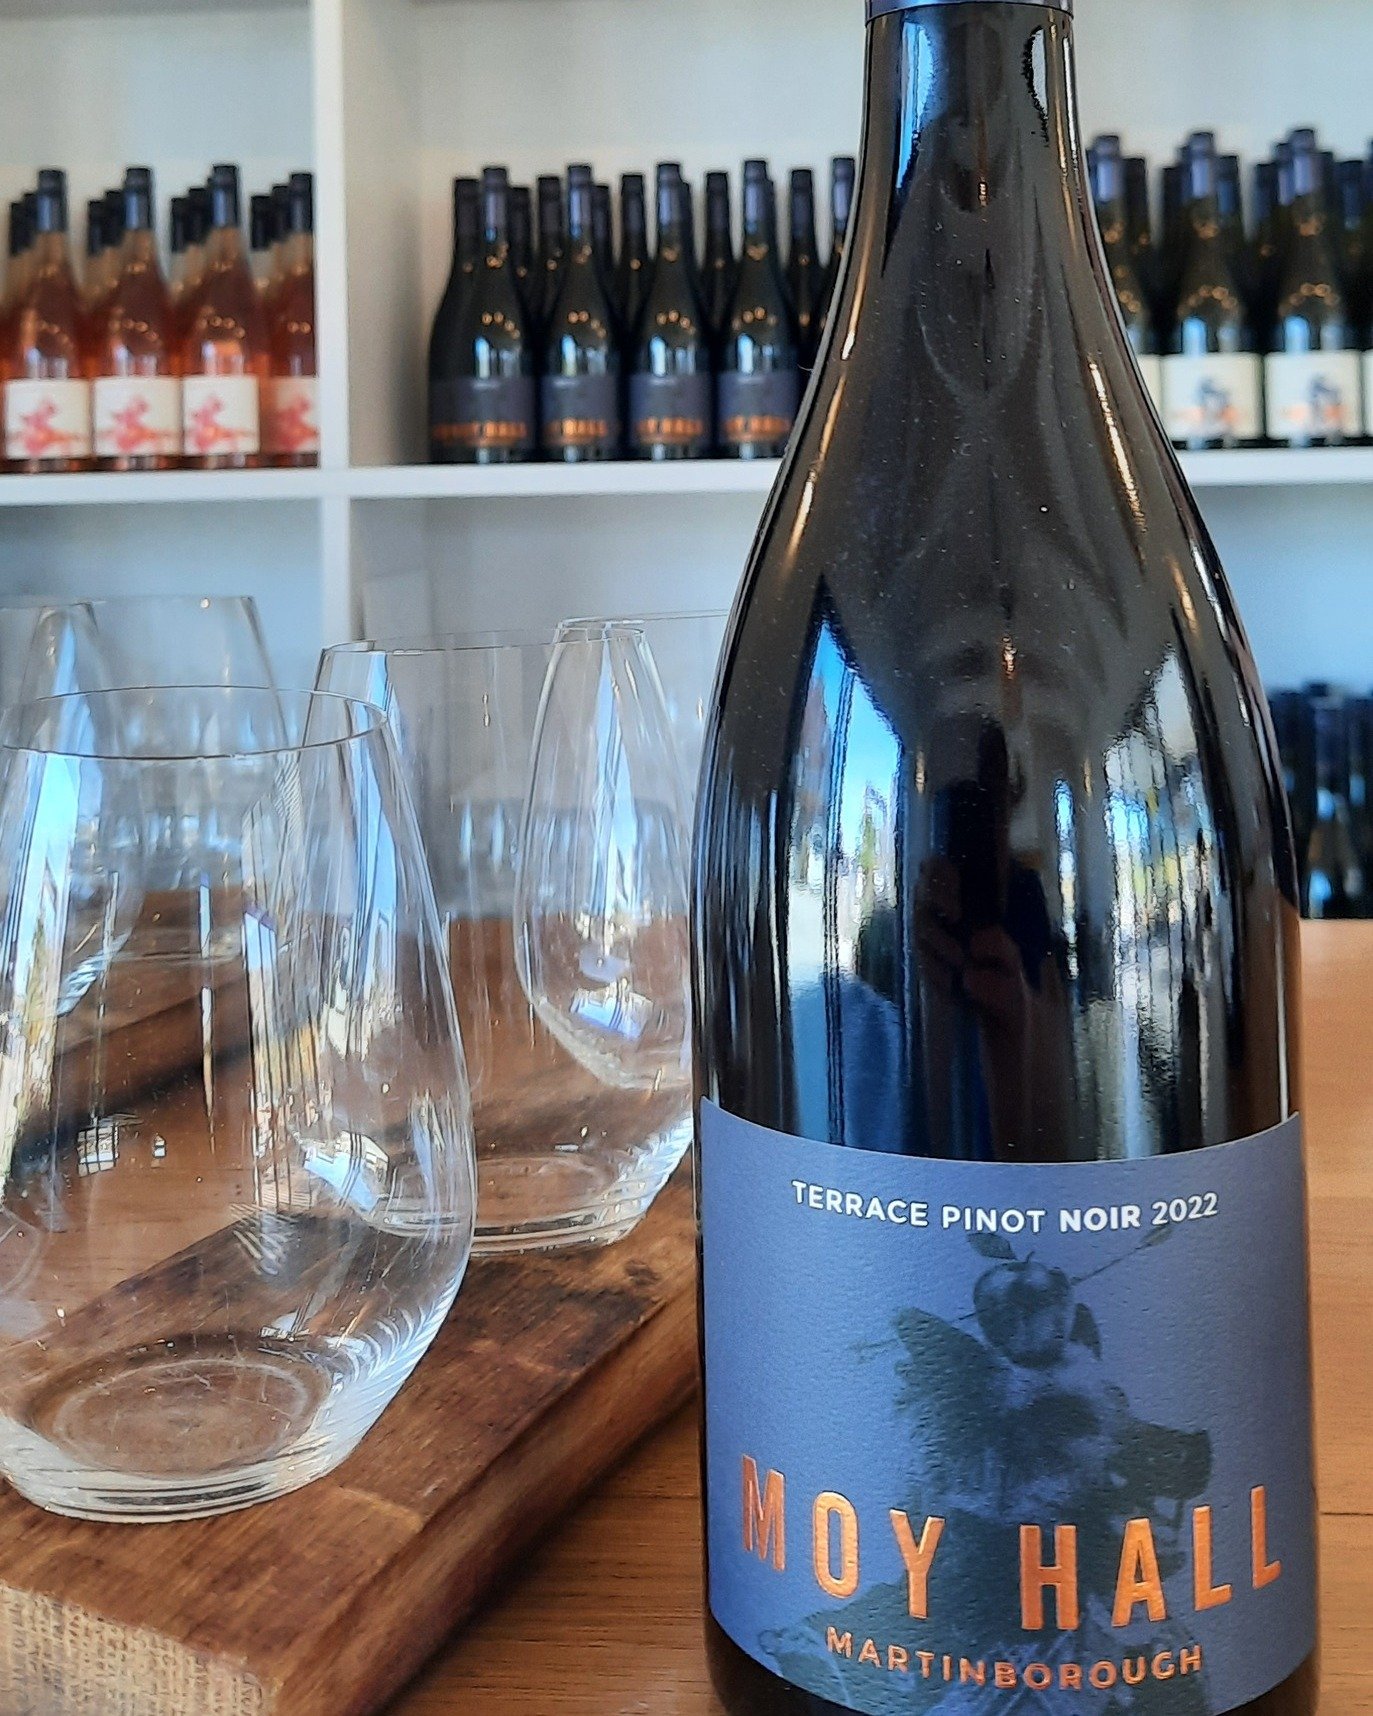 February 2024: Wine of the Month

The Moy Hall Terrace Pinot Noir (2022) claims the Wine of the Month award for February 2024. This follows on from wins for their previous vintages as well so just goes to show what a consistently great job Phil and t